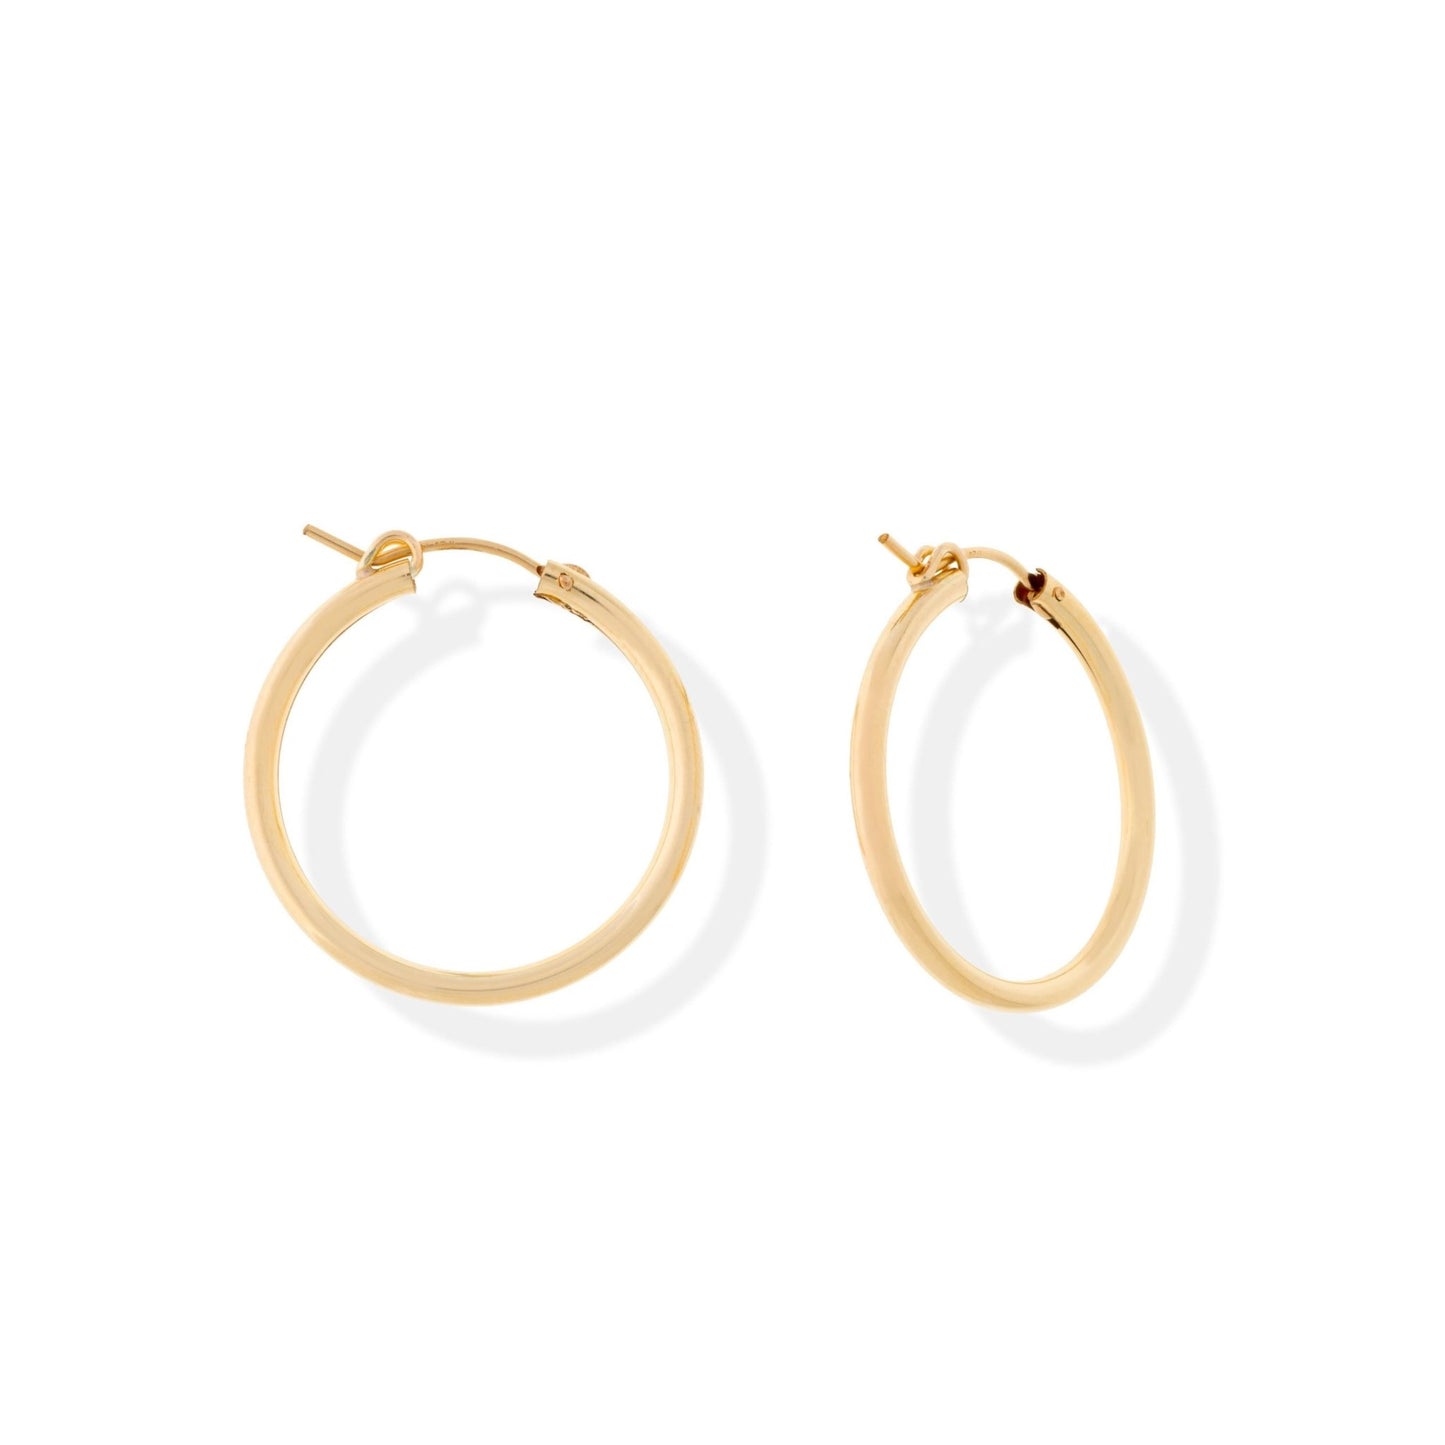 Replacement Hoop - 14kt Goldfill - Le Serey